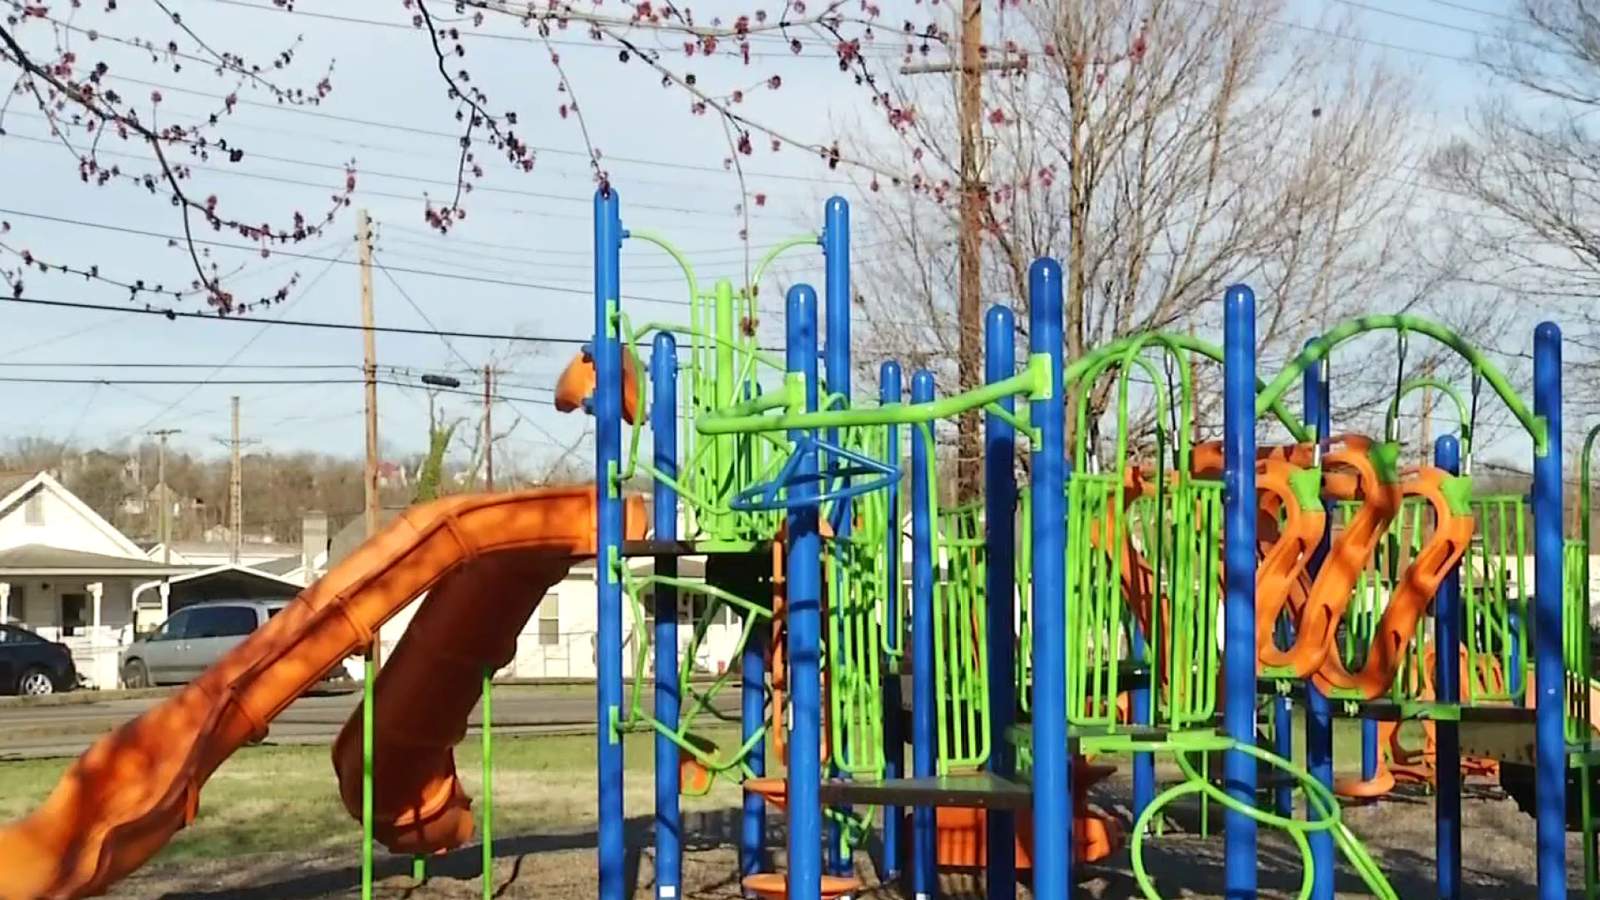 Play Roanoke working to equip all playgrounds with sanitizing stations